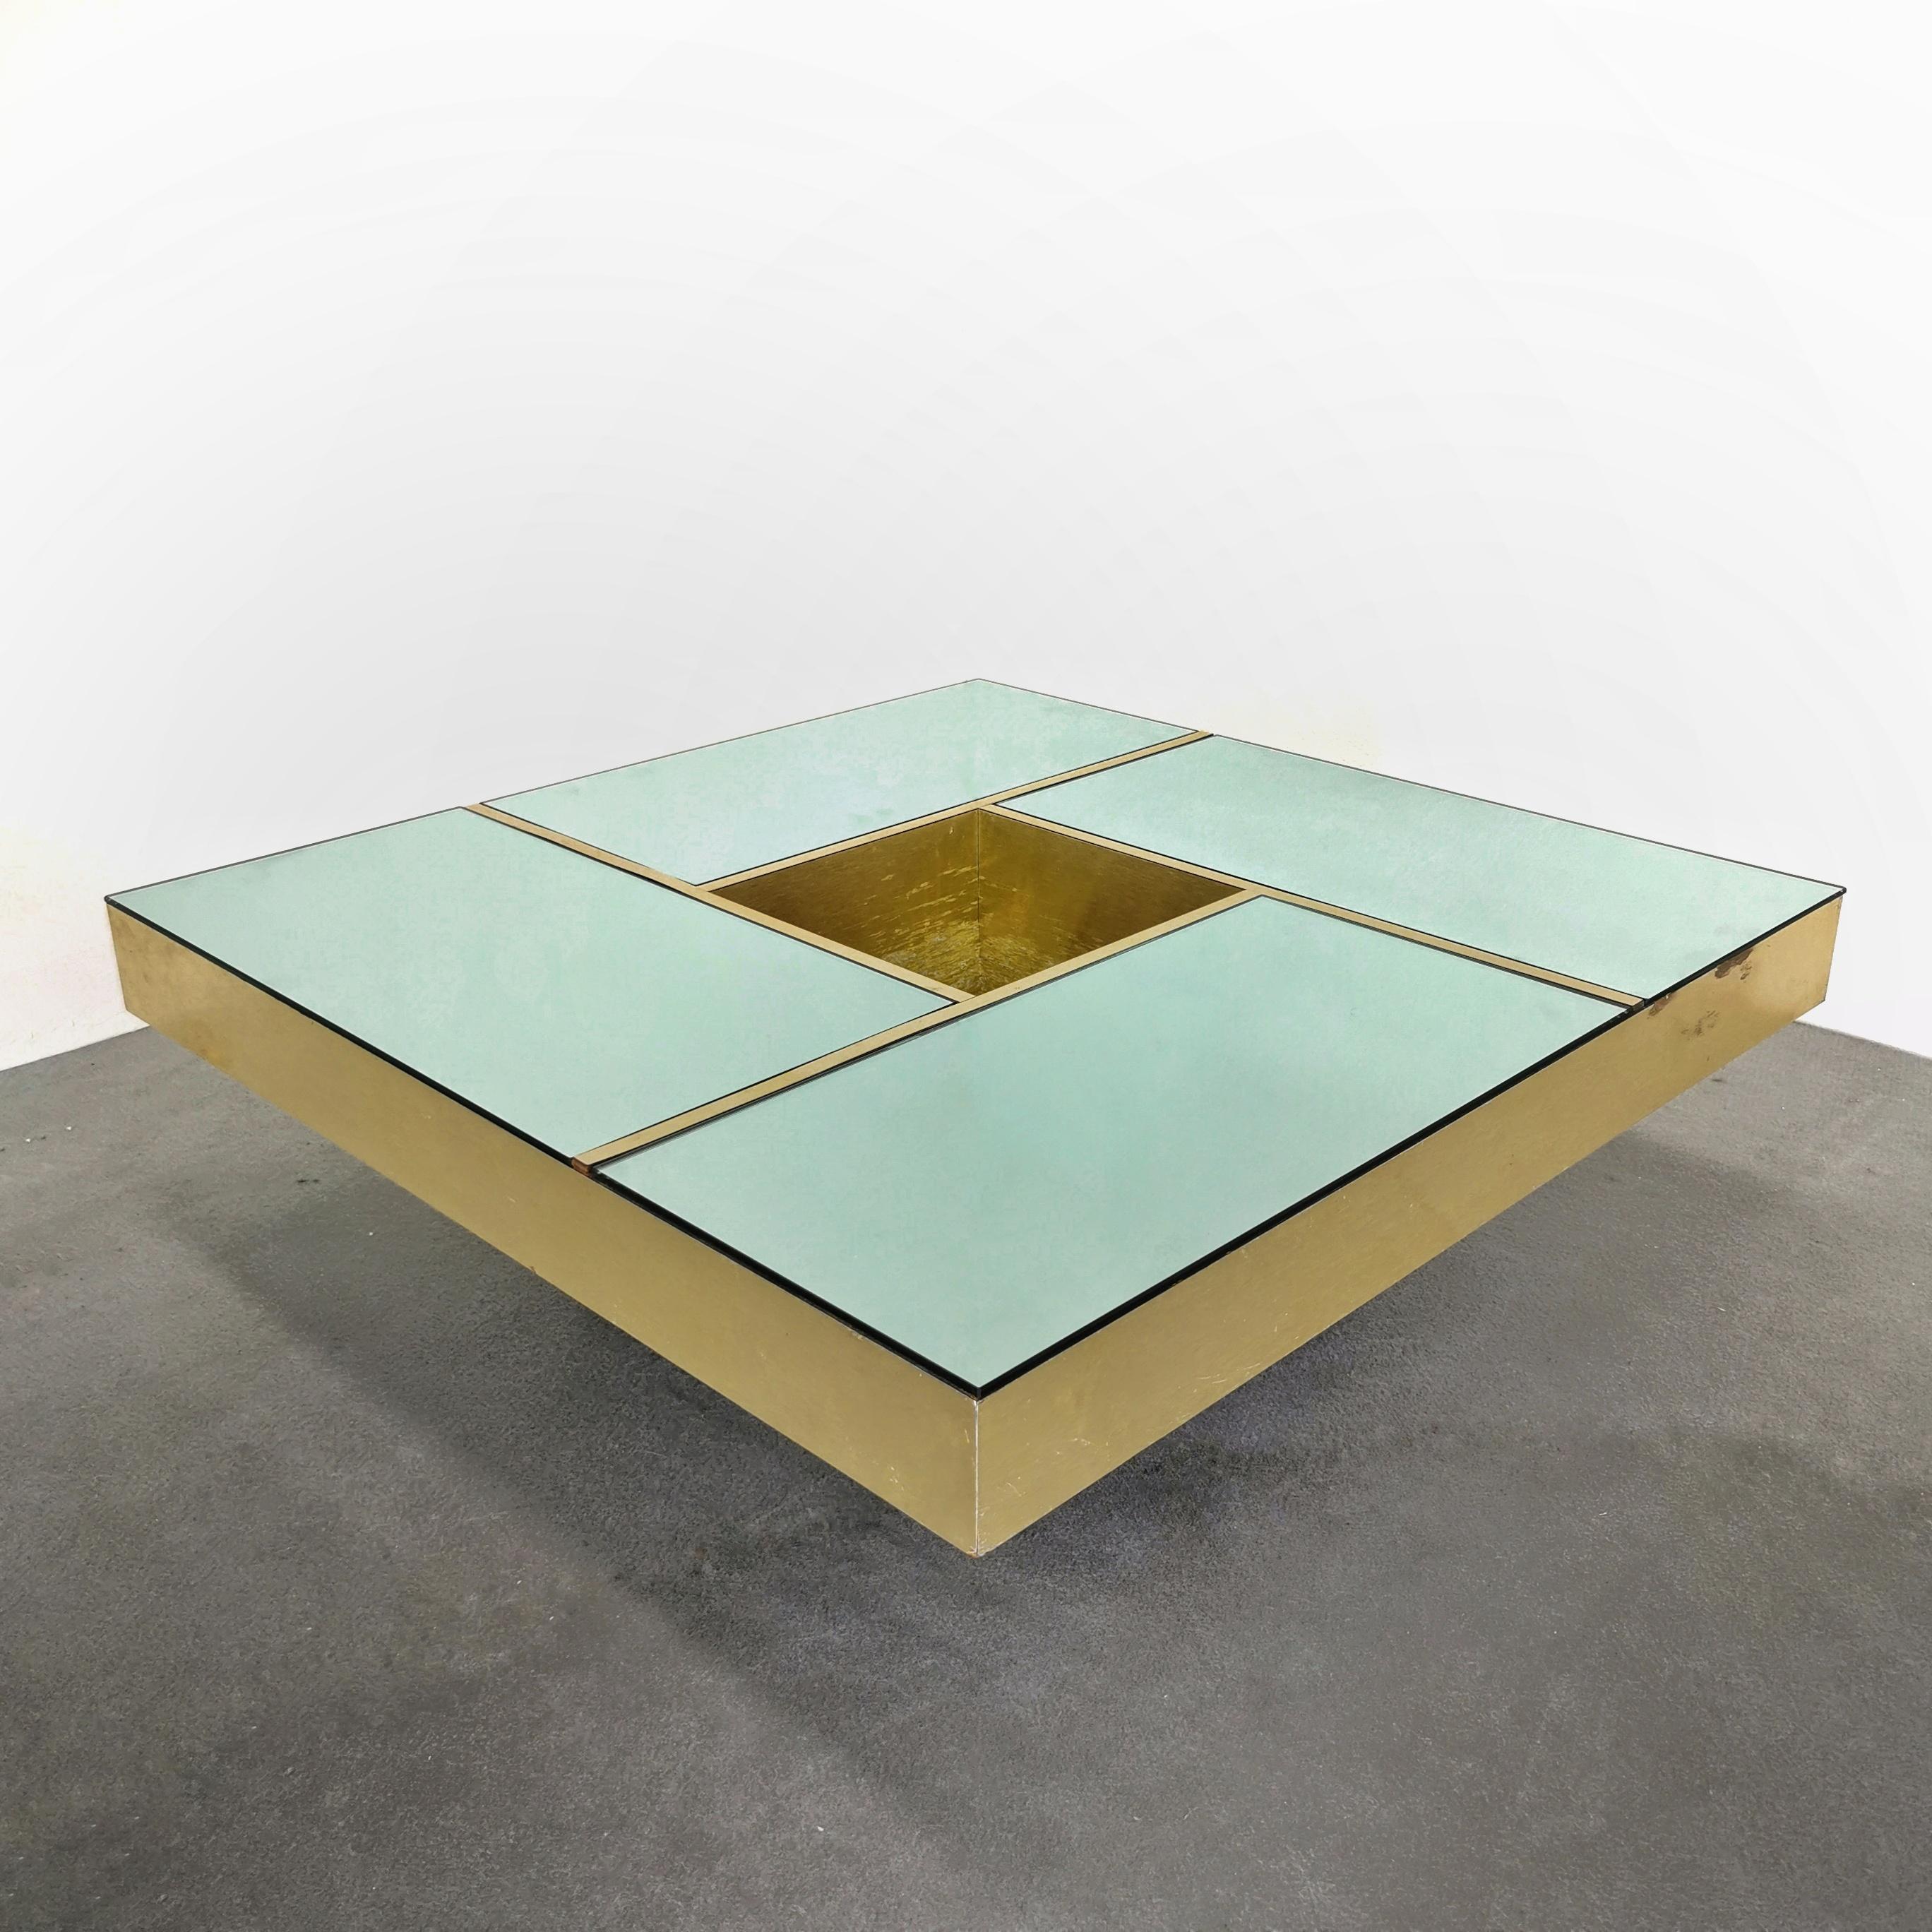 Square coffee table model 'Shilling' designed in the 1970s by Giovanni Ausenda, Guido Baldo Grossi & Gianni Gavioli for NY Form. Gold-colored table with green mirror top divided into four sections by gold bands. The center square can be used as a